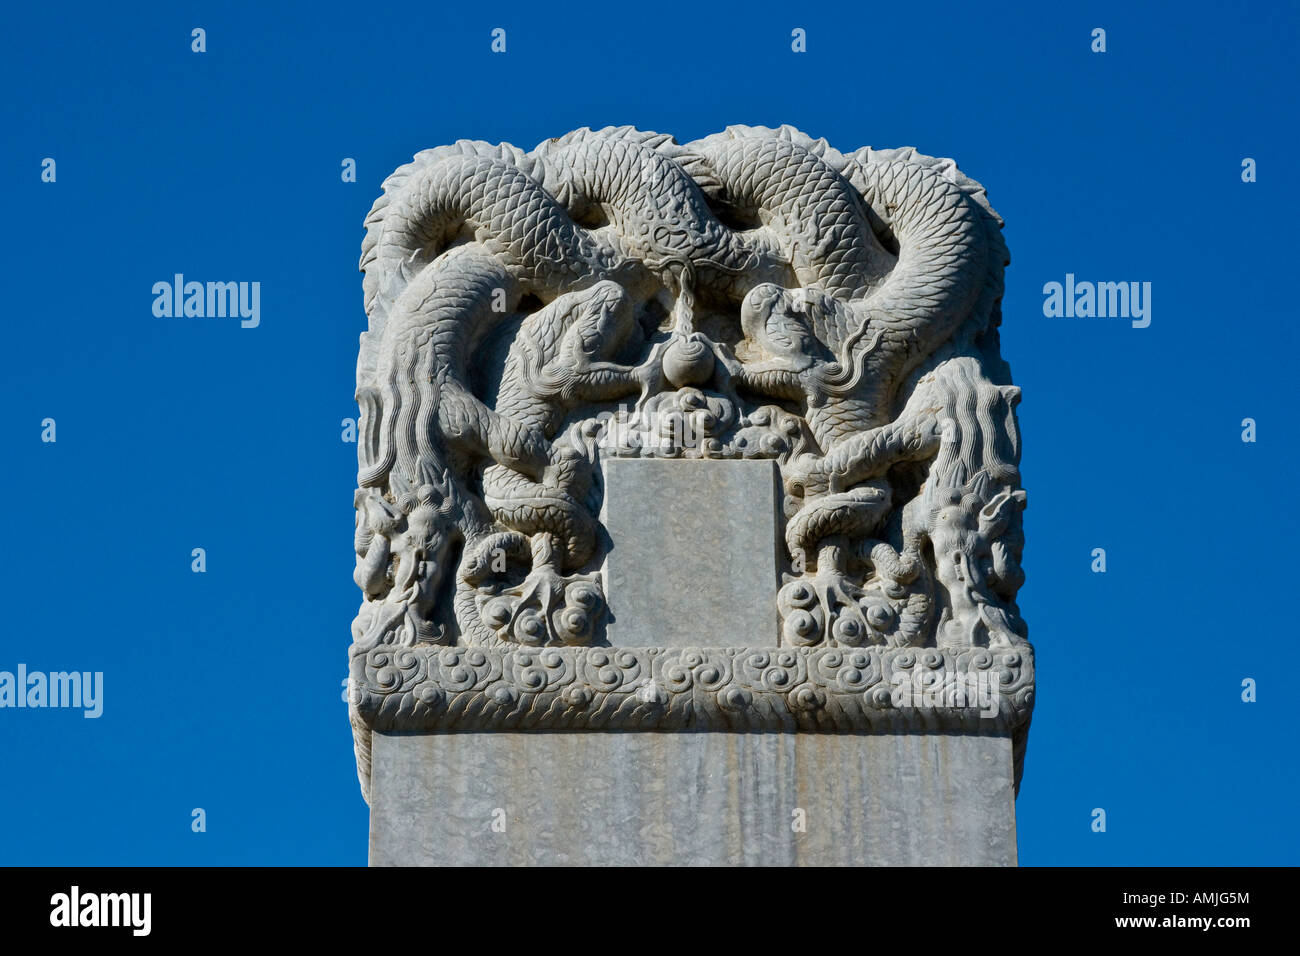 Merits and Virtues Stele Dingling Ming Tombs Beijing China Stock Photo